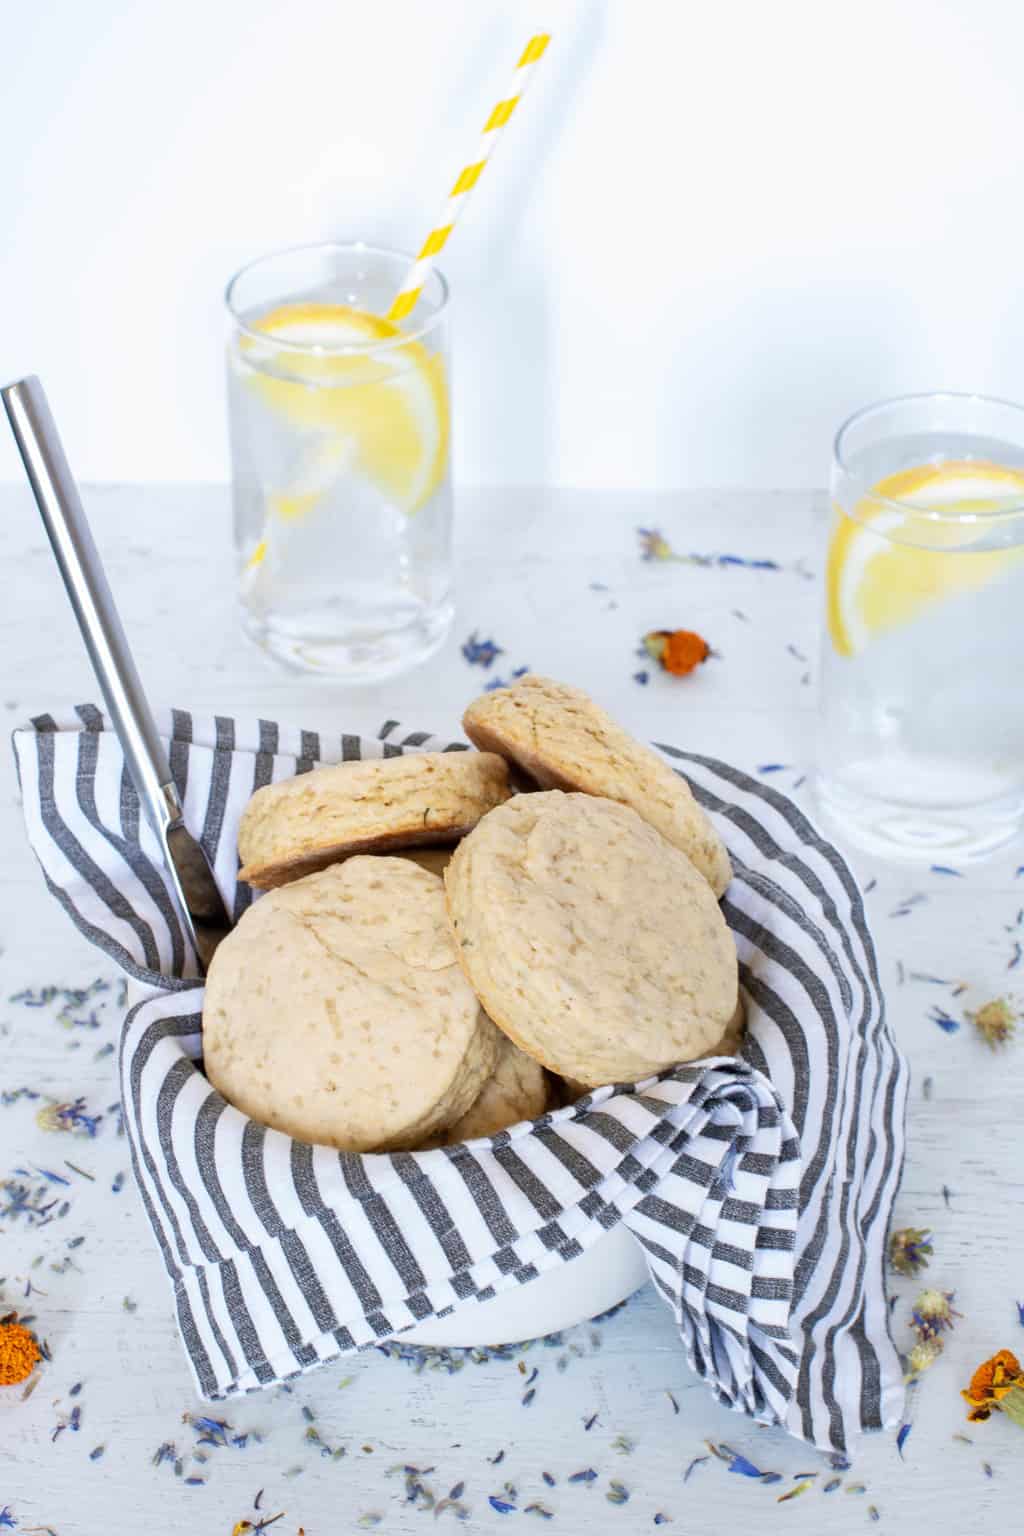 Maple Whole Wheat Biscuits + Maple Butter